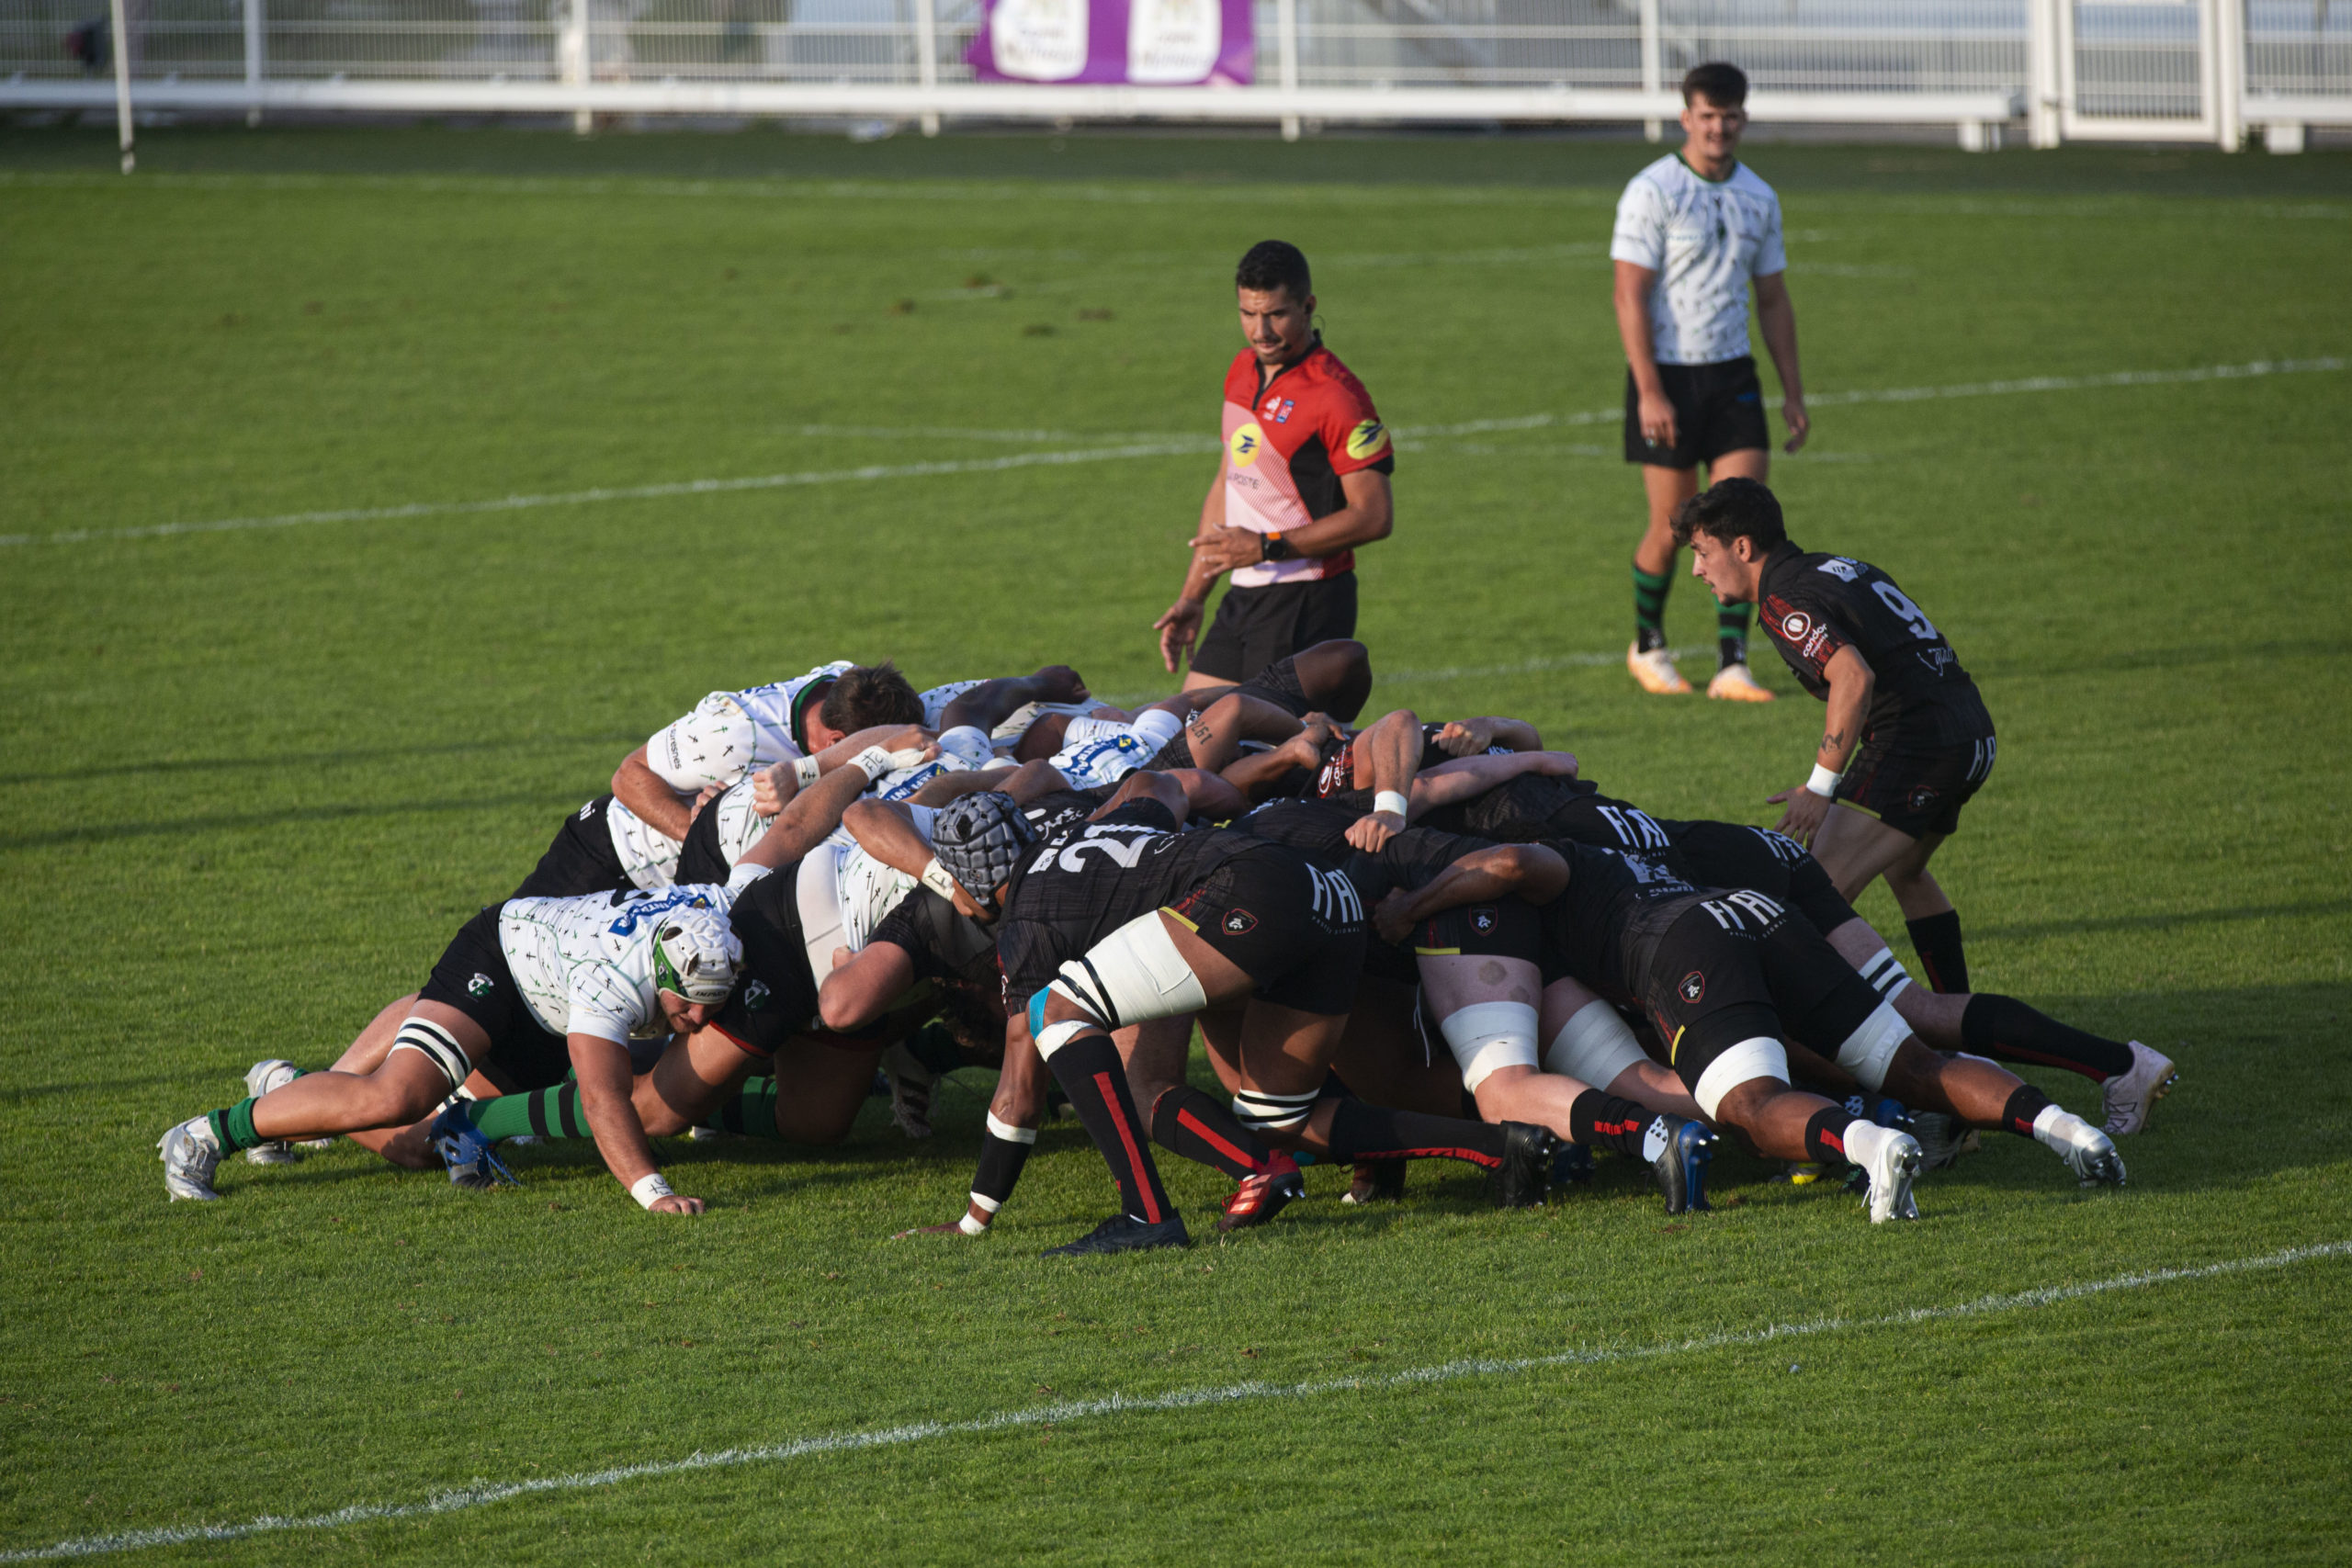 https://rouennormandierugby.fr/wp-content/uploads/2023/08/HS3A0756-scaled.jpg